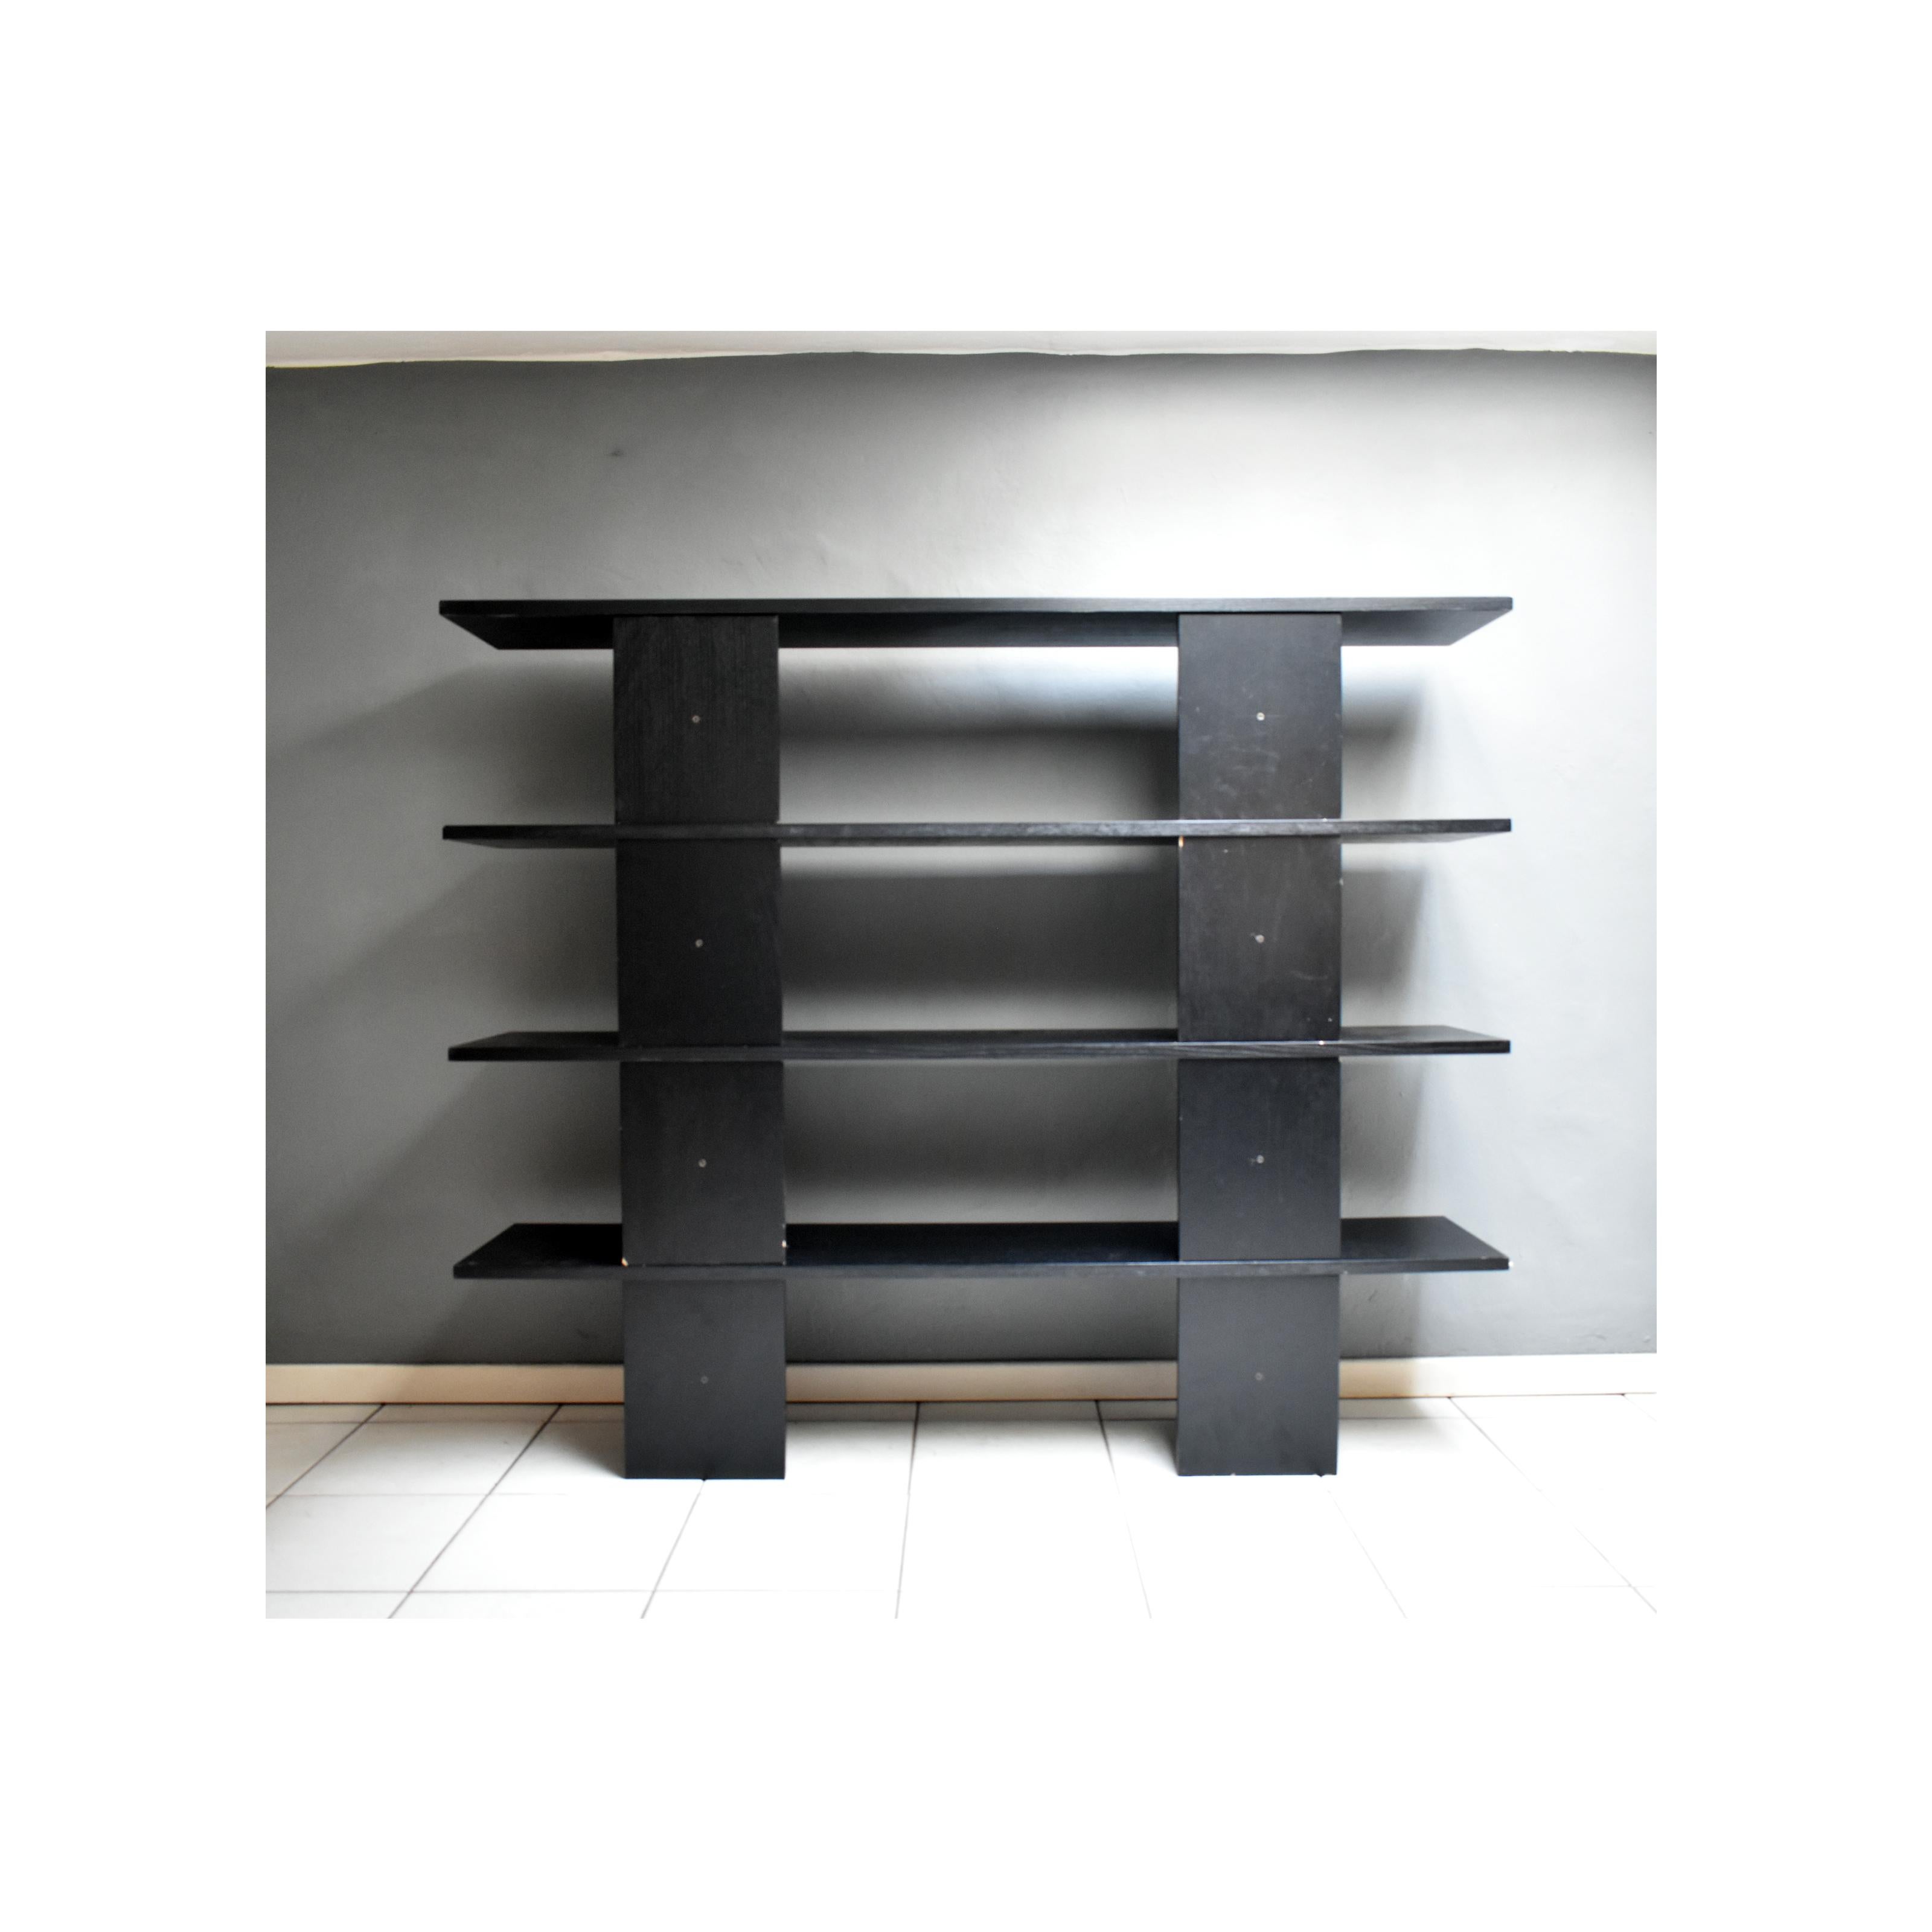 Vintage 80's Bookcase in Black Wood, Italian Manufacture 1